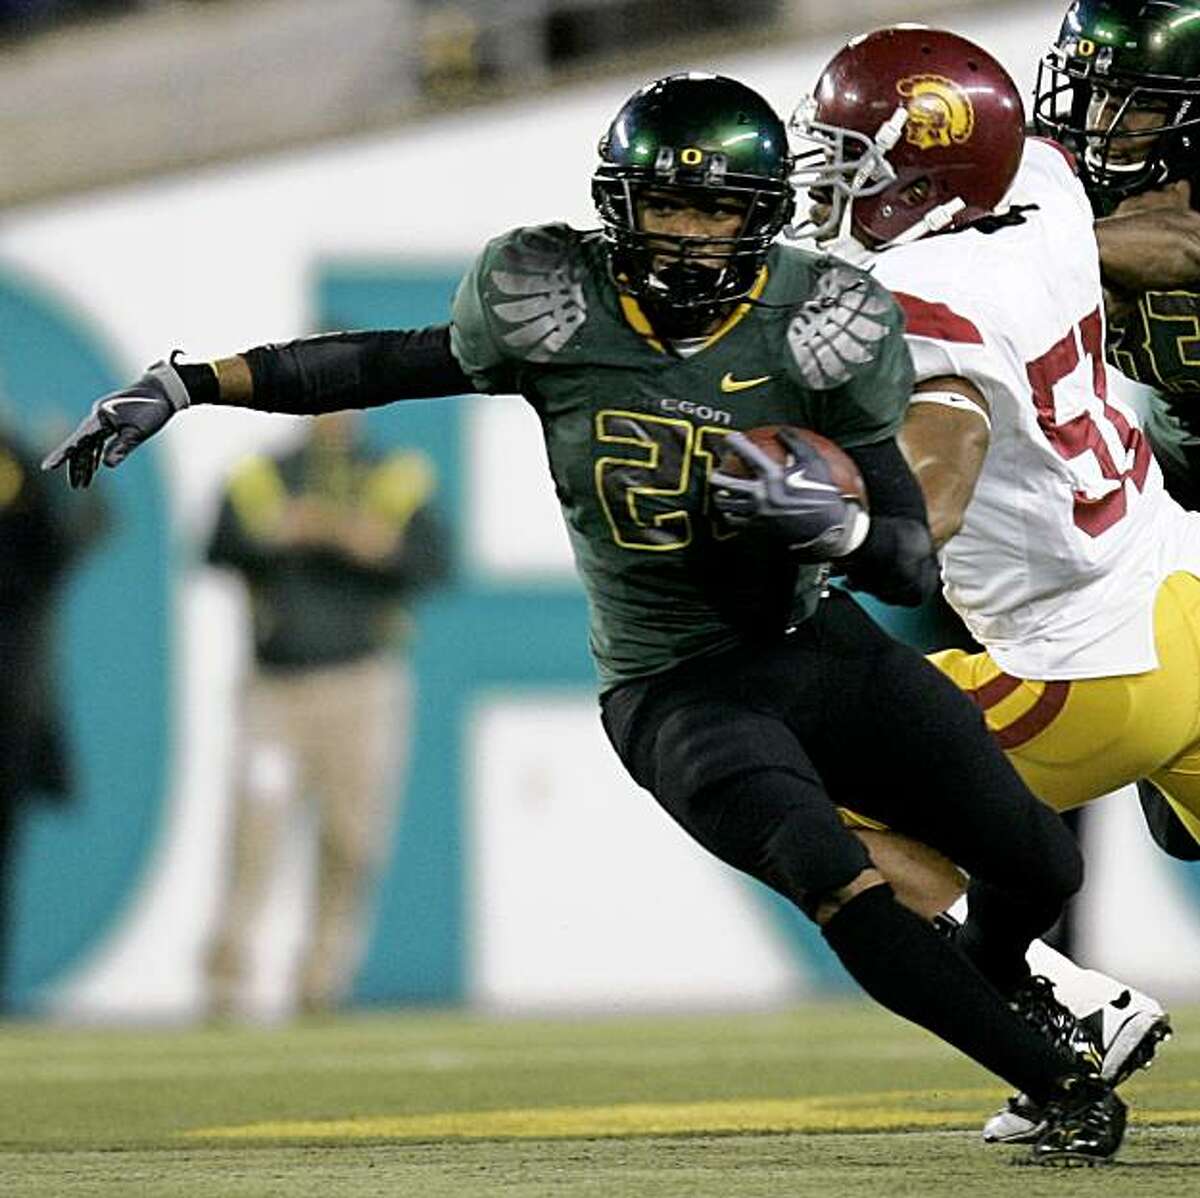 Oregon running back LaMichael James, left, gets past Southern California defender Jarvis Jones (51) during the second half of their NCAA college football game in Eugene, Ore., Saturday, Oct. 31, 2009. James rushed for 185 yards and one touchdown as Oregon beat USC 47-20. (AP Photo/Don Ryan)